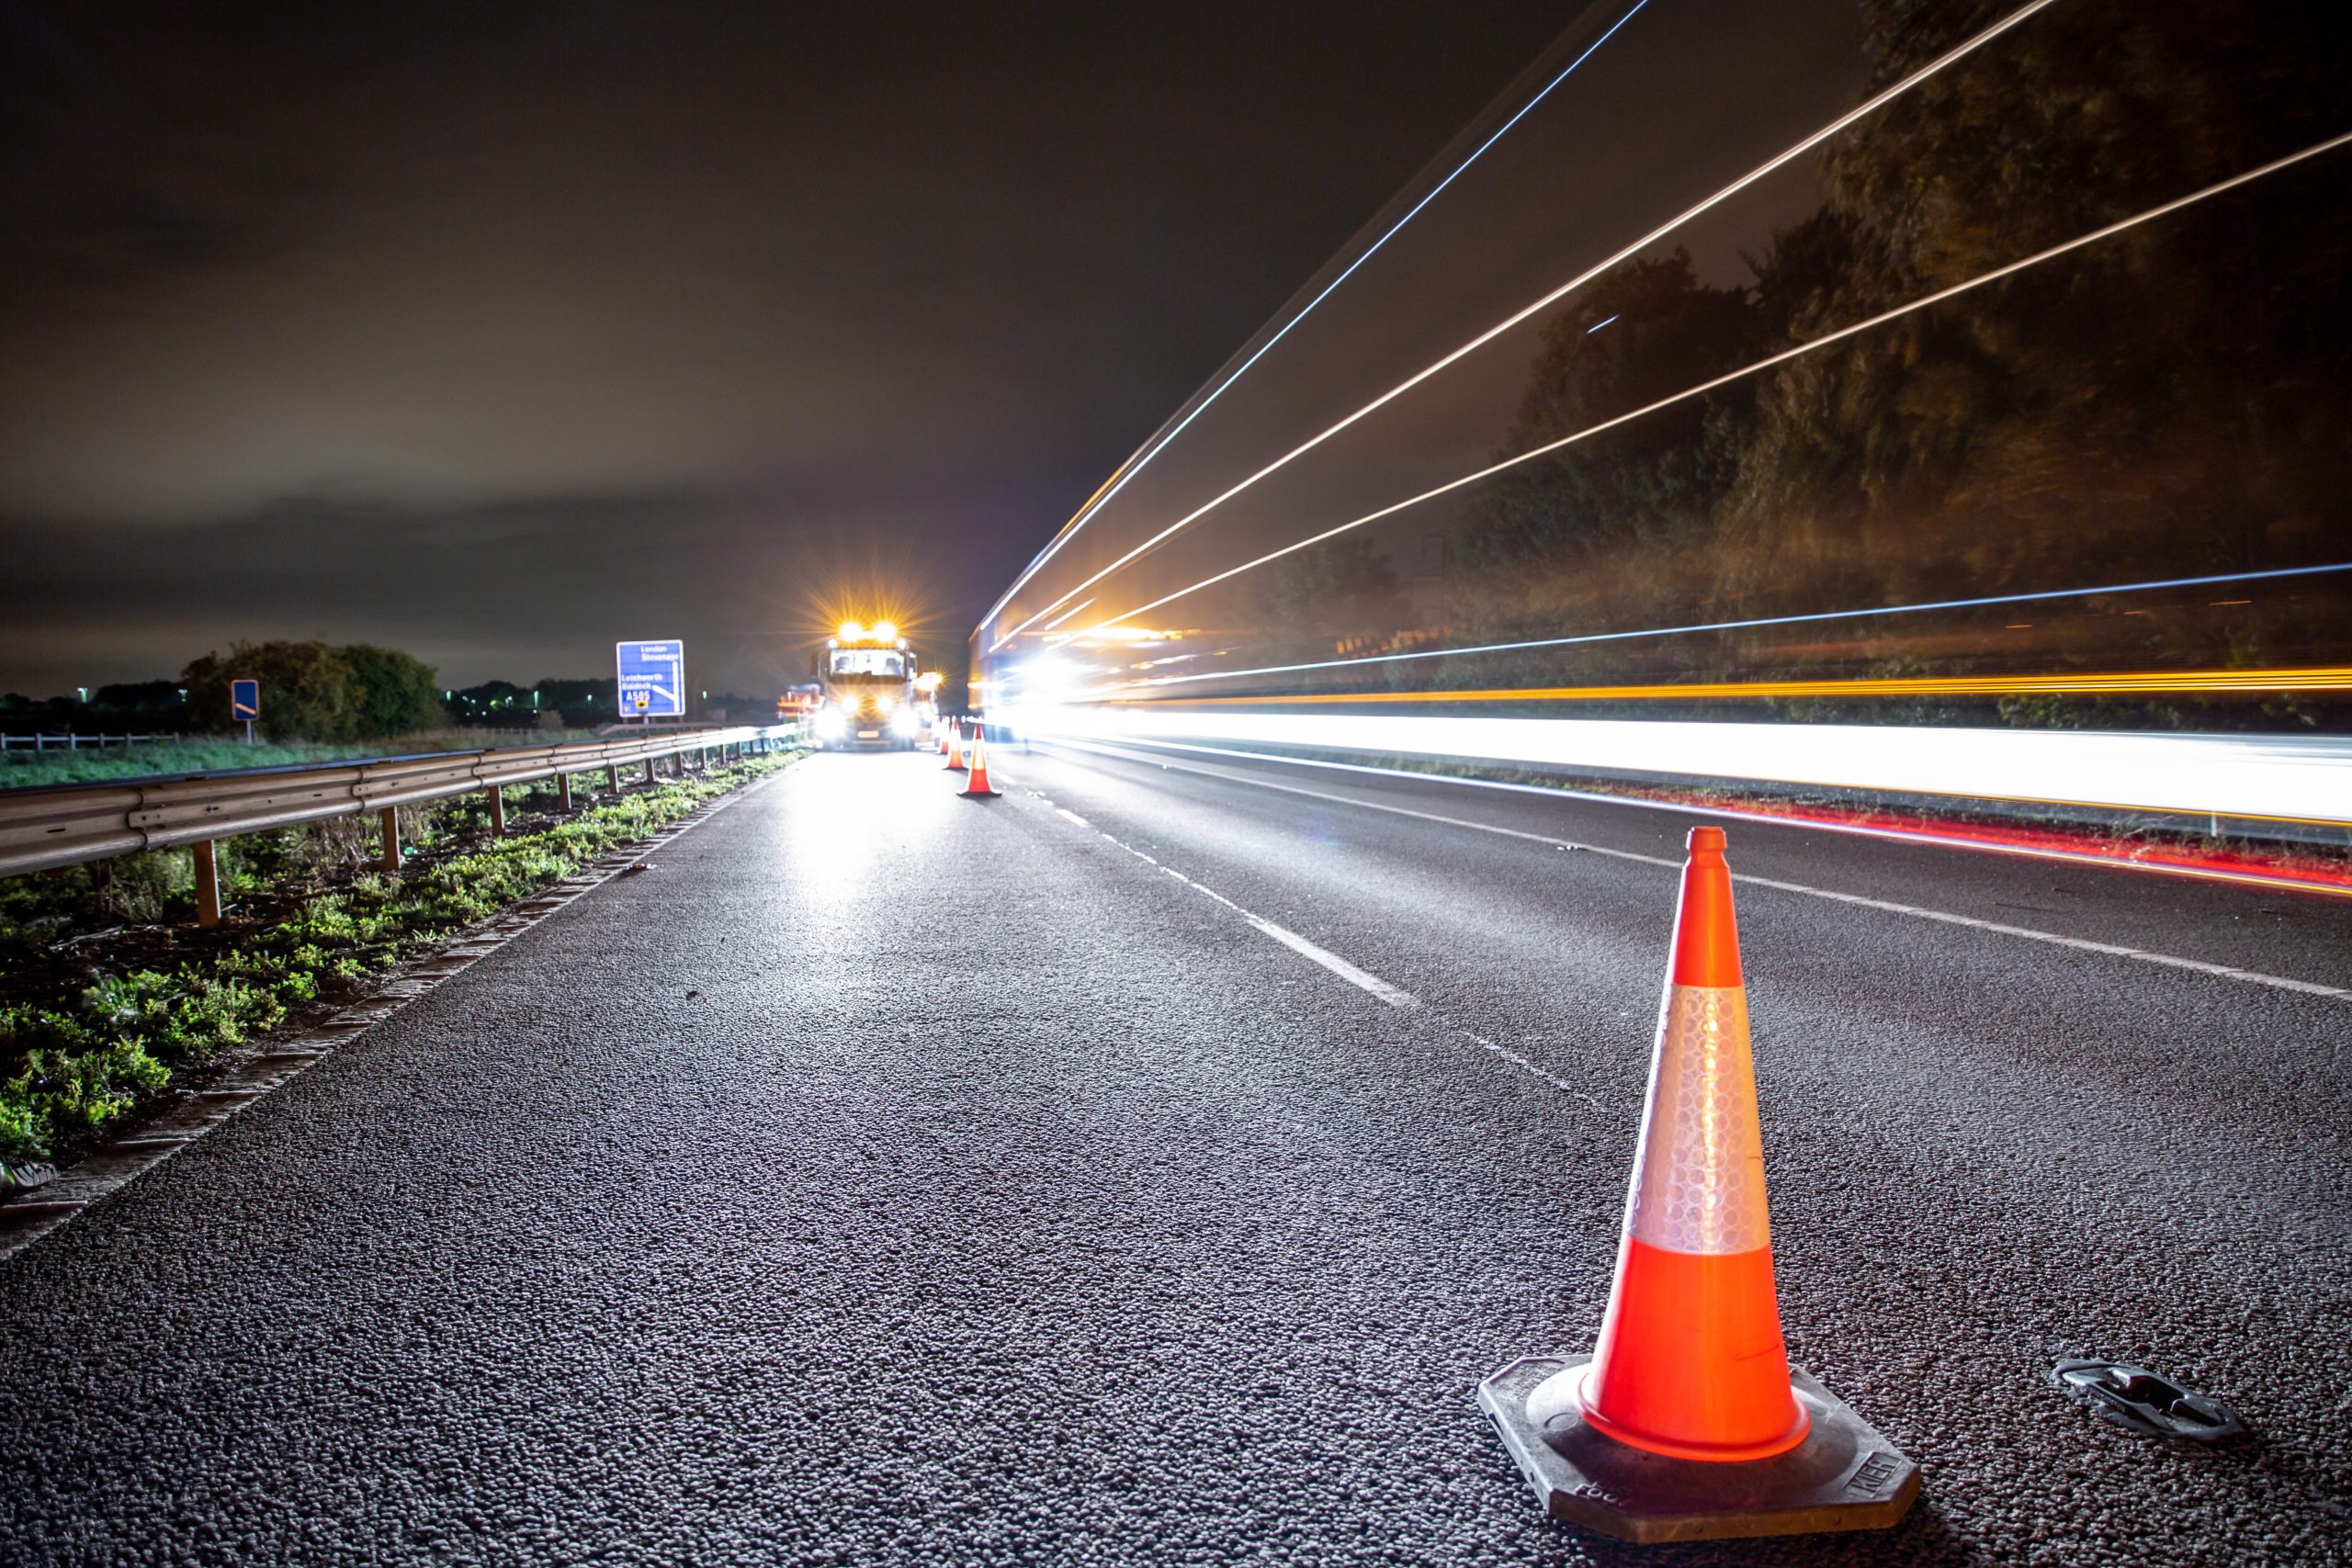 Long Exposure of a Vehicle on a Highway With Active Roadworks